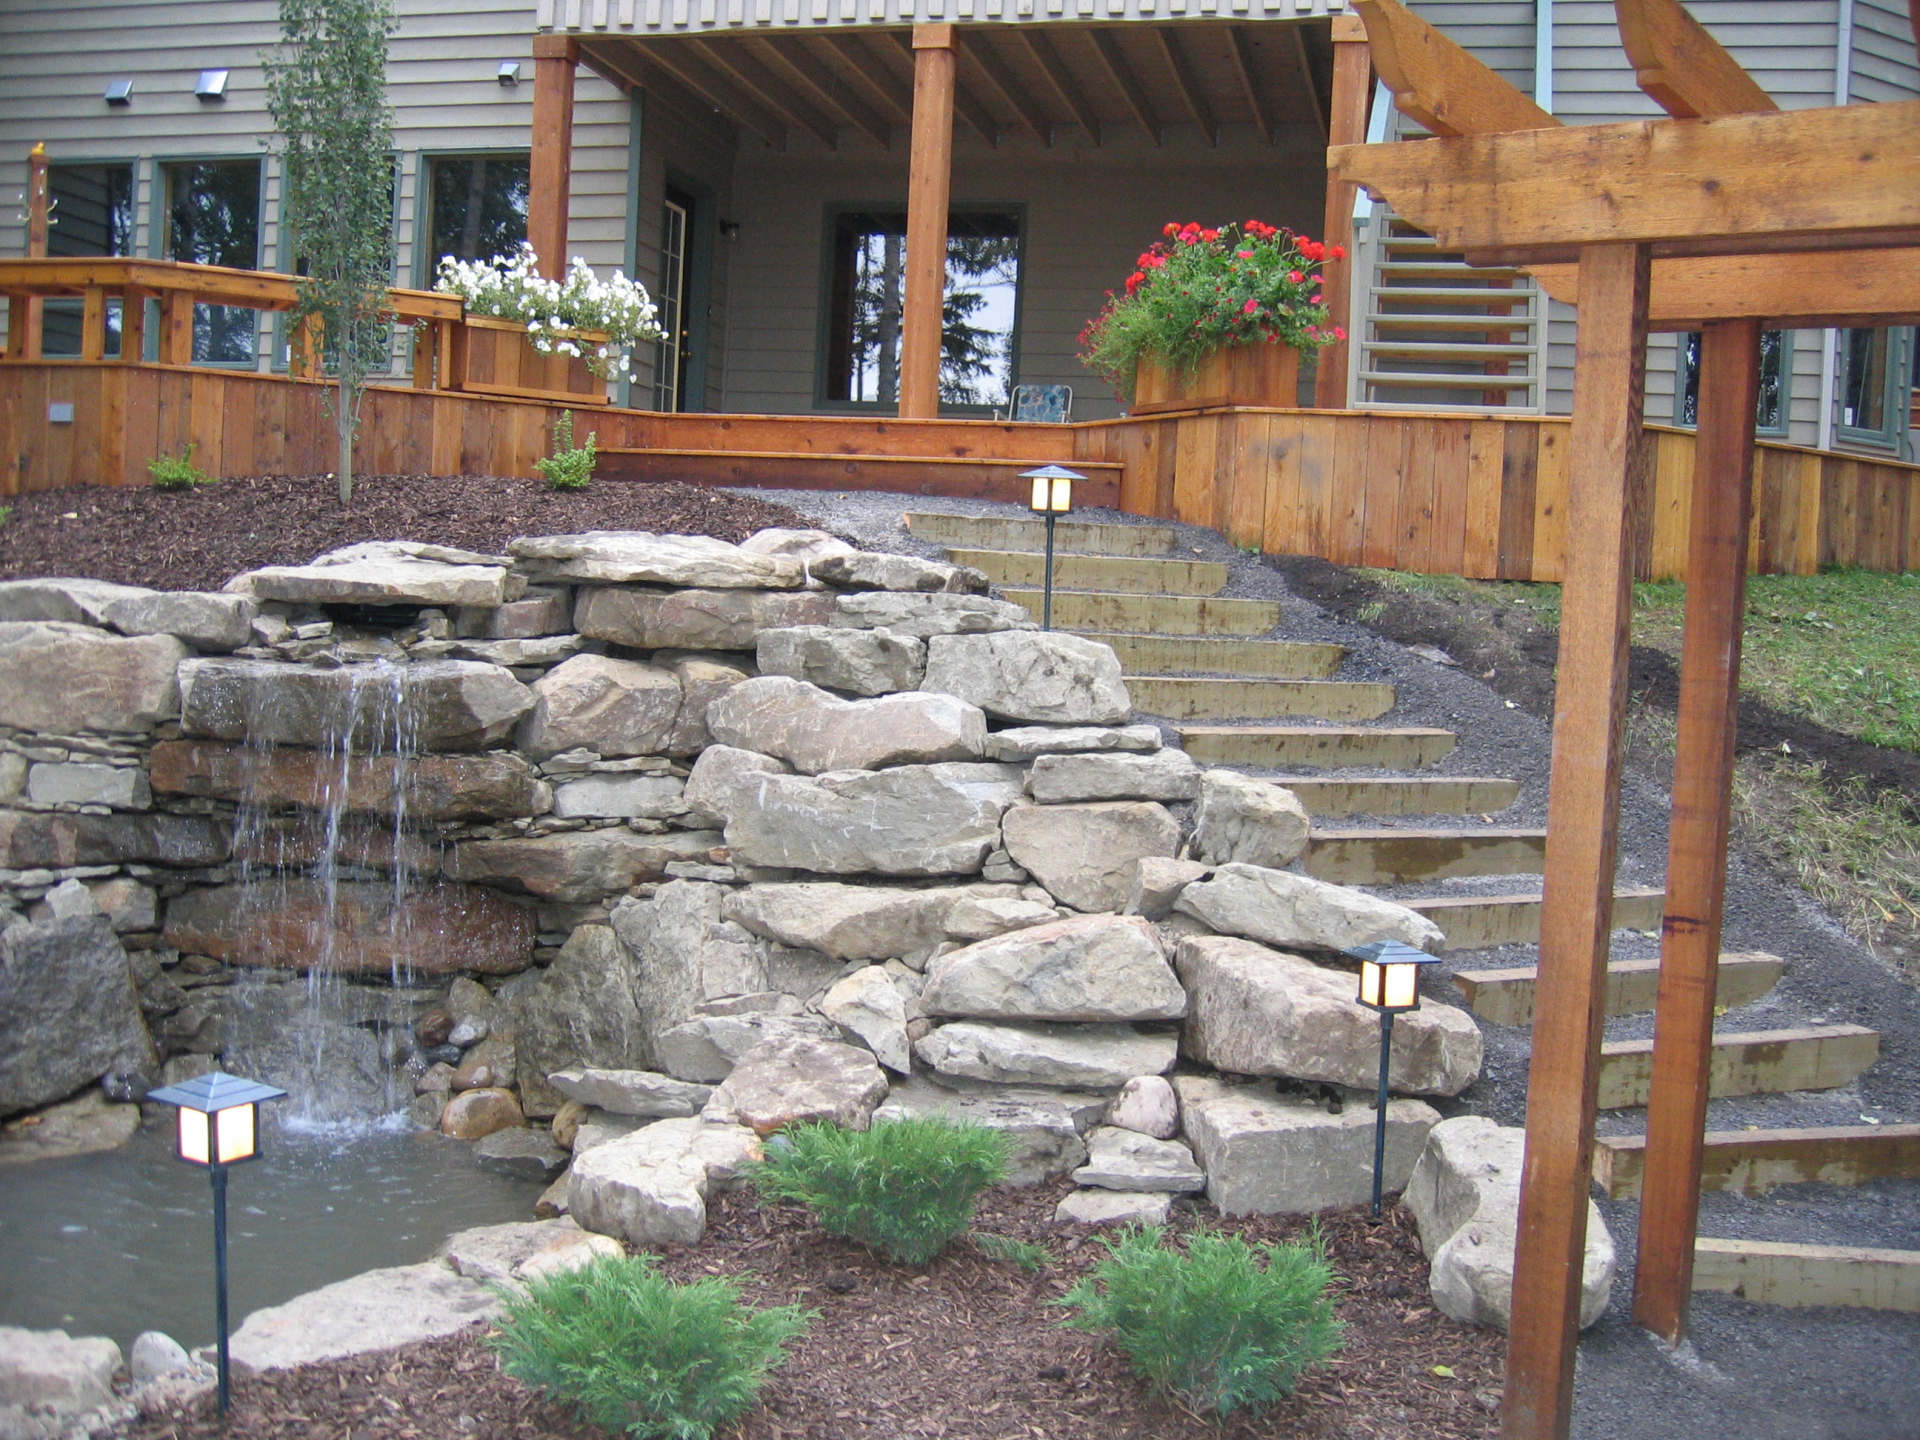 Waterfall in pond surrounded in rocks in backyard garden with wood trellis